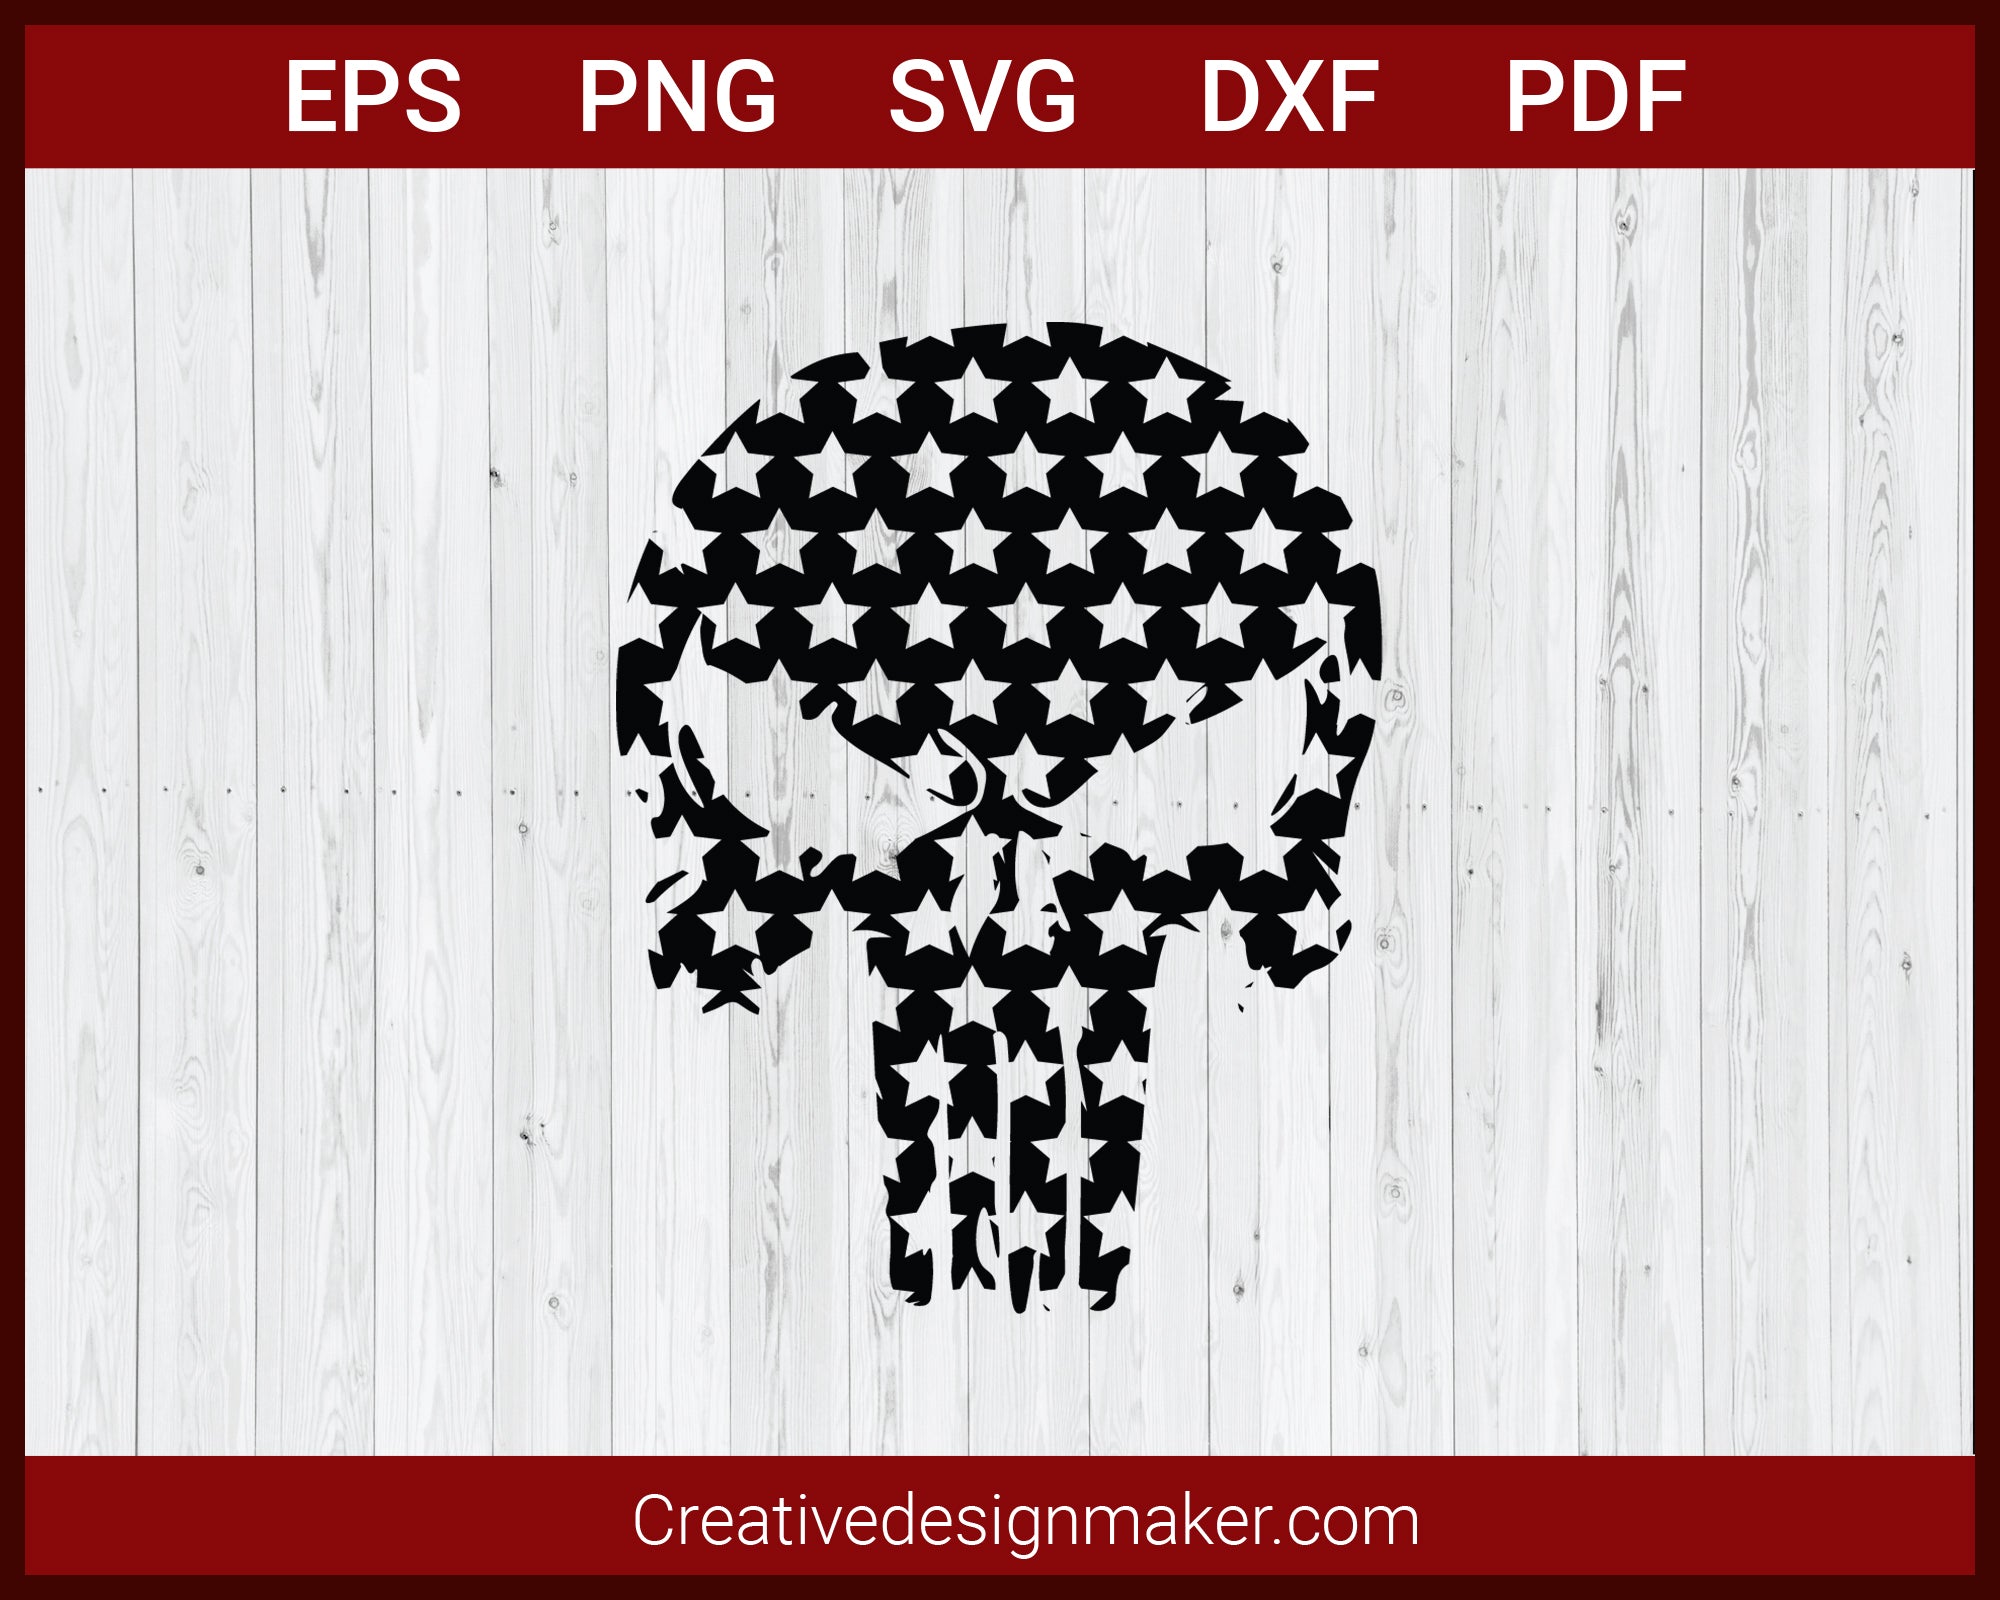 American Punisher Skull USA SVG Cricut Silhouette DXF PNG EPS Cut File